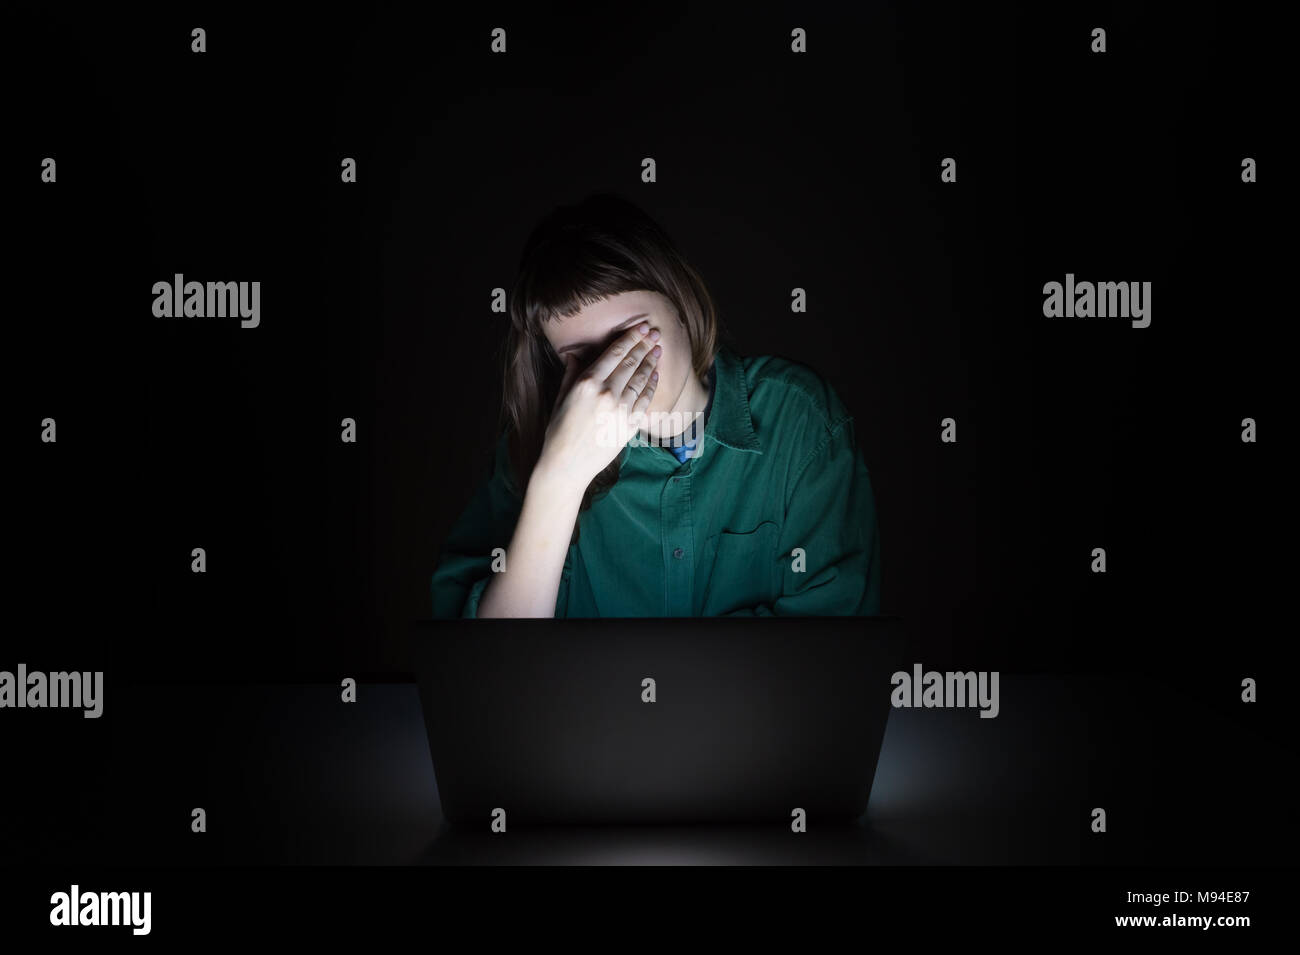 Tired and exhausted young woman rubs eyes at laptop pc late in the evening. Portrait of depressed female student or worker sitting in front of compute Stock Photo